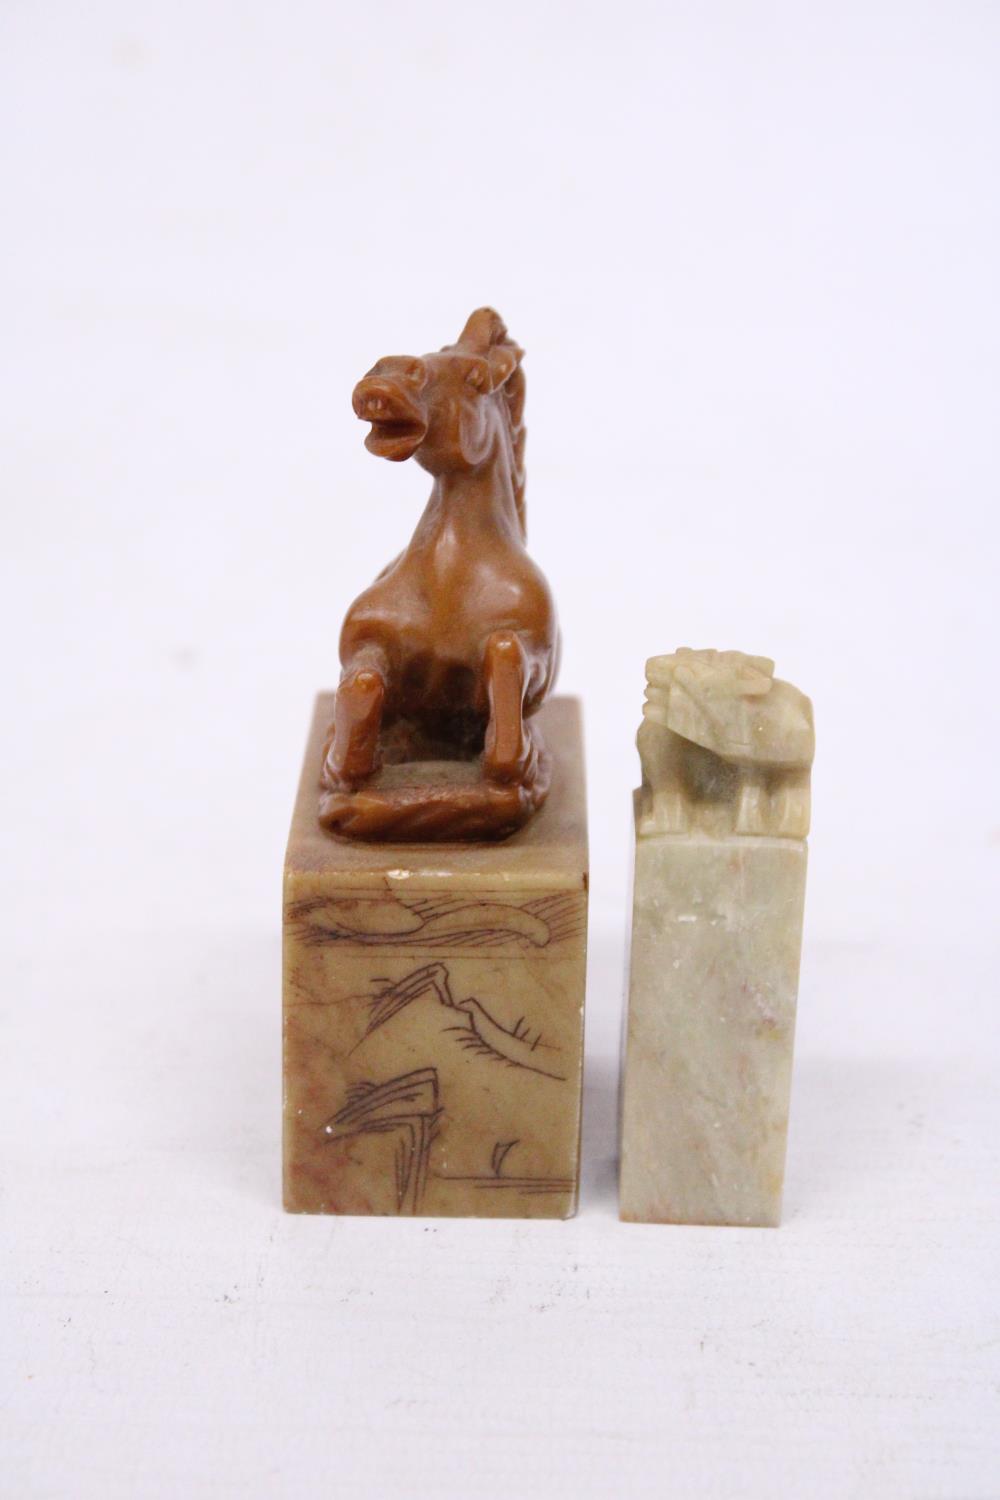 A CHINESE CARVED SOAPSTONE SEAL DEPICTING A REARING HORSE TOGETHER WITH A LION SEAL CARVING - Image 4 of 6